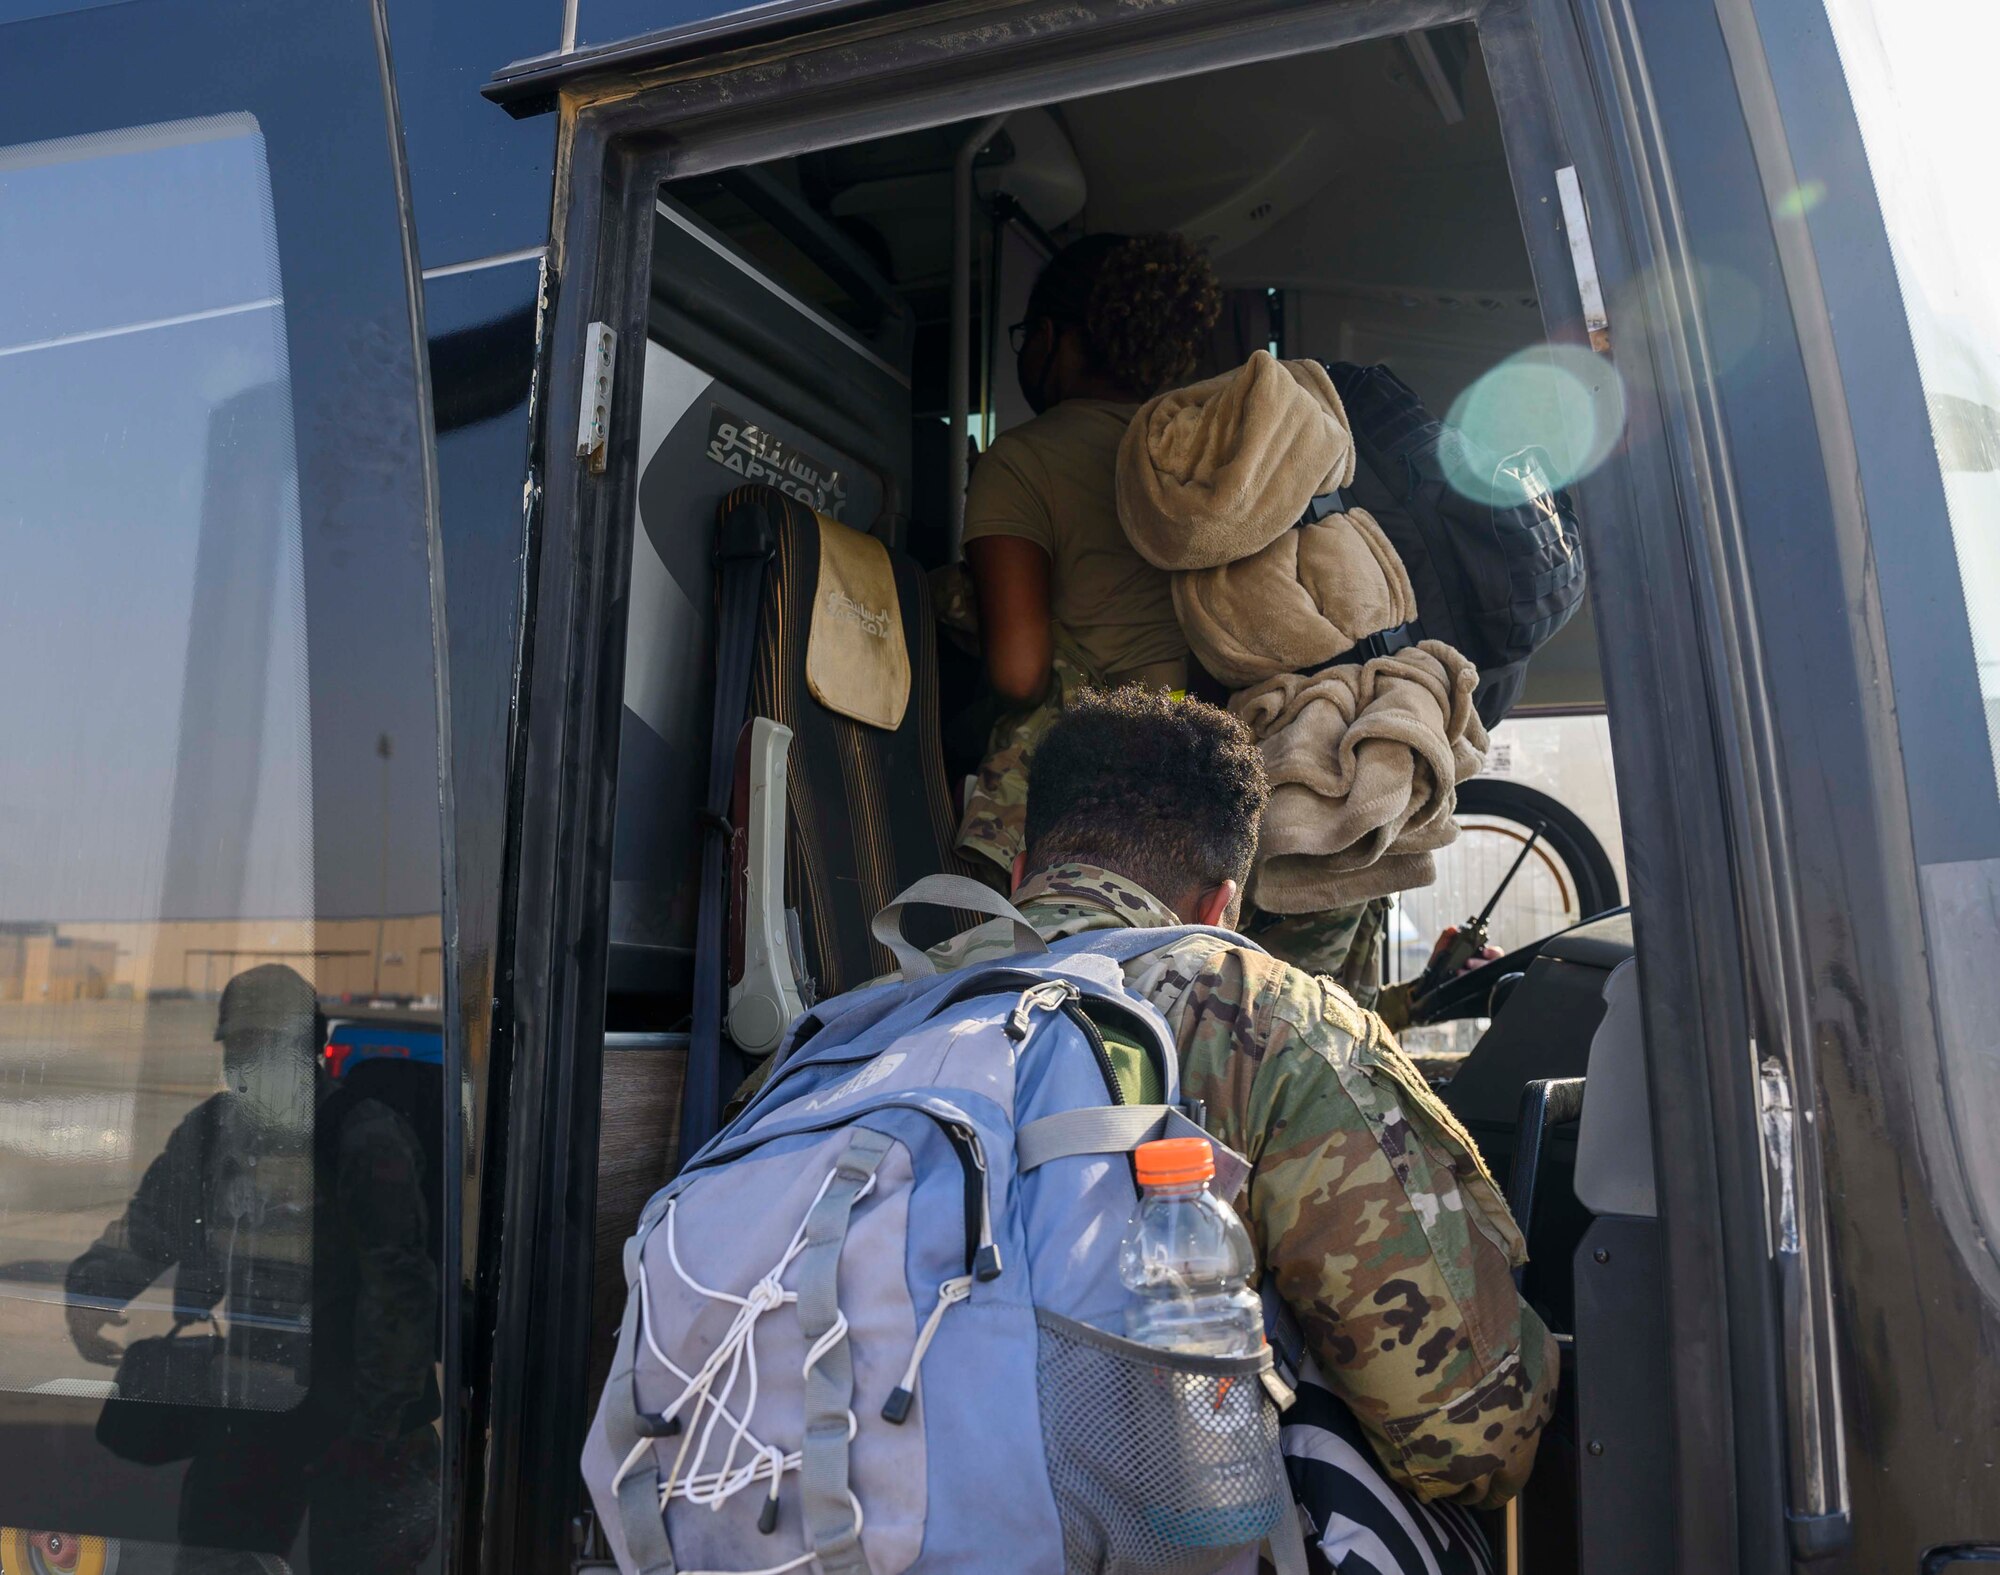 Airmen from the District of Columbia Air National Guard’s 113th Wing, known as the “Capital Guardians,” board a bus to in-process at Prince Sultan Air Base, Kingdom of Saudi Arabia, July 11, 2021. The wing deployed a contingent of U.S. Air Force F-16 Fighting Falcons to PSAB to reinforce the base’s defensive capabilities, provide operational depth, and support U.S. Central Command operations in the region. (U.S. Air Force Photo by Senior Airman Samuel Earick)